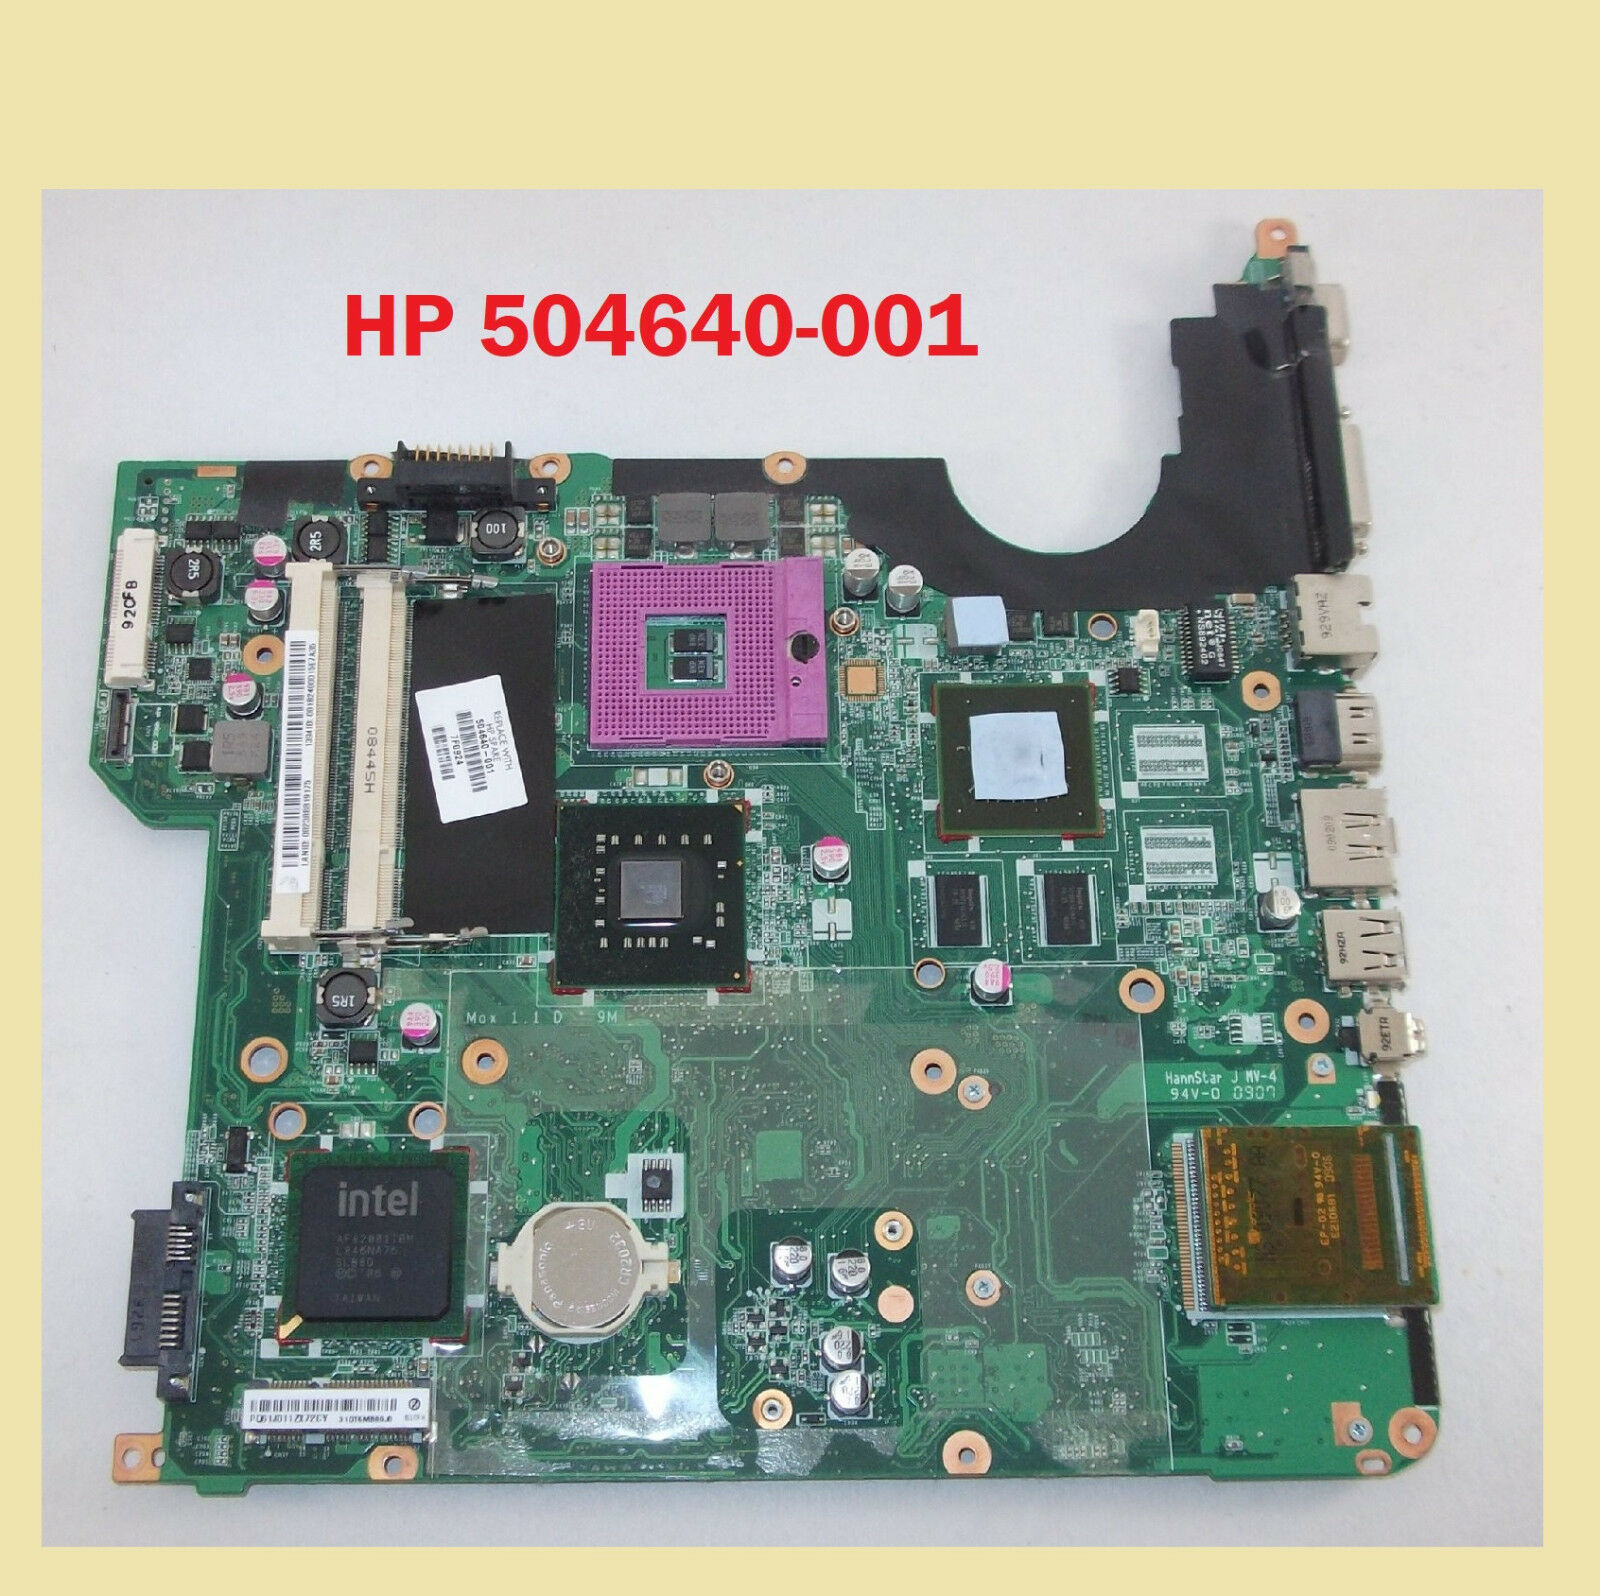 504640-001 Intel PM45 Motherboard for HP DV5-1200 Laptop, DDR2 nVidia 9200 256 A Socket Type: SEE PICS OR